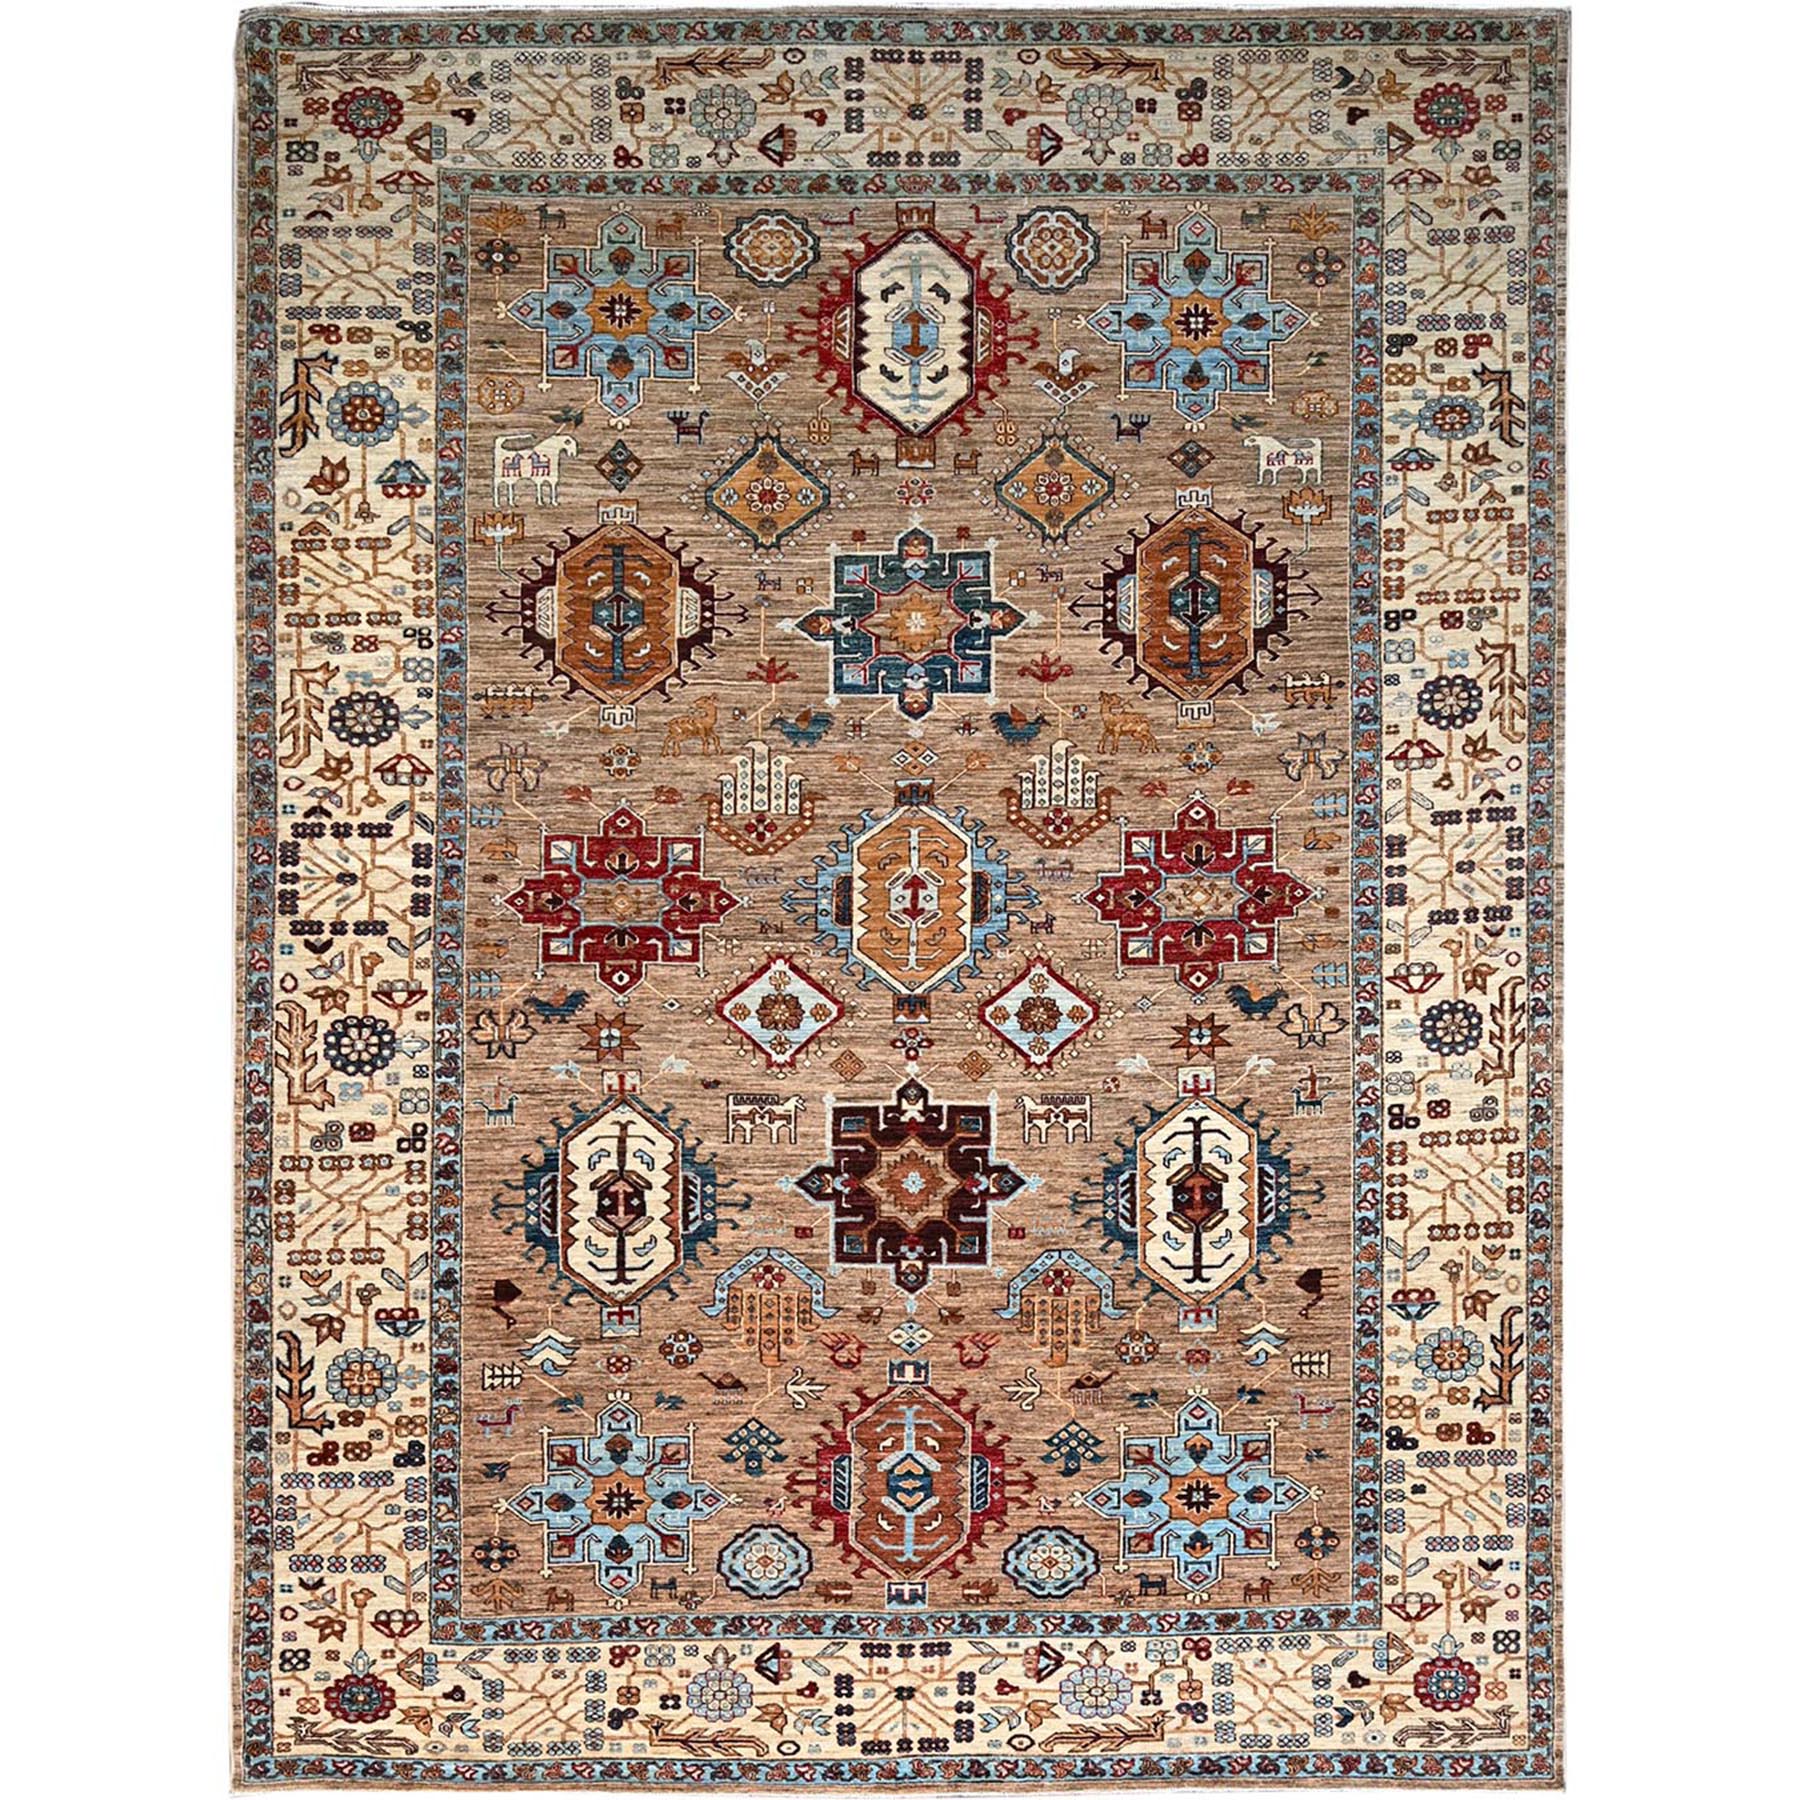 Porcini Beige, Densely Woven Afghan Super Kazak with Geometric Elements, Vegetable Dyes, 100% Wool, Hand Knotted, Oriental Rug